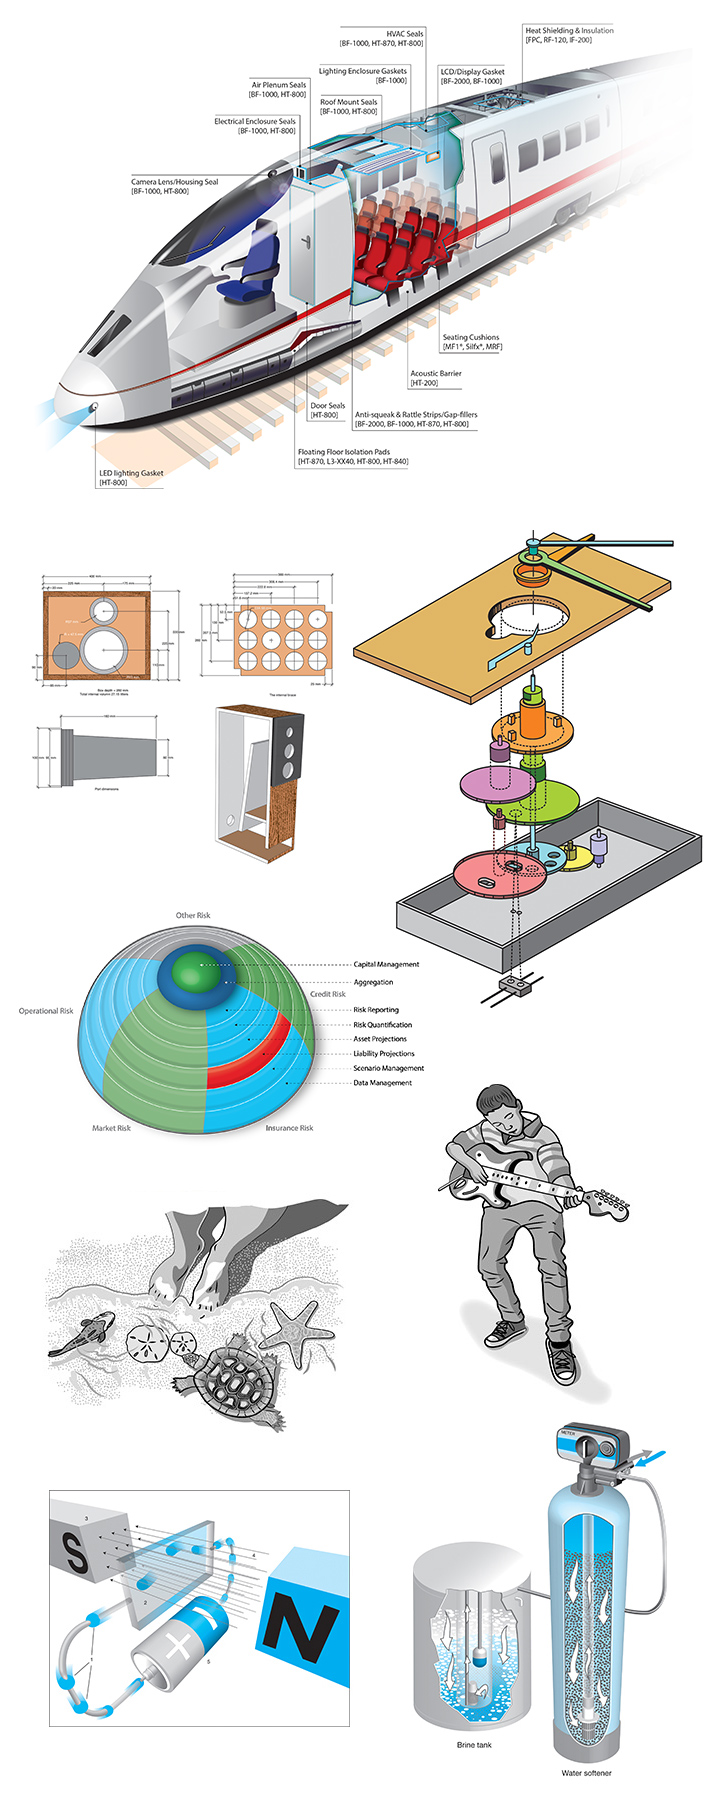 Grace Chen infographics and technical illustration